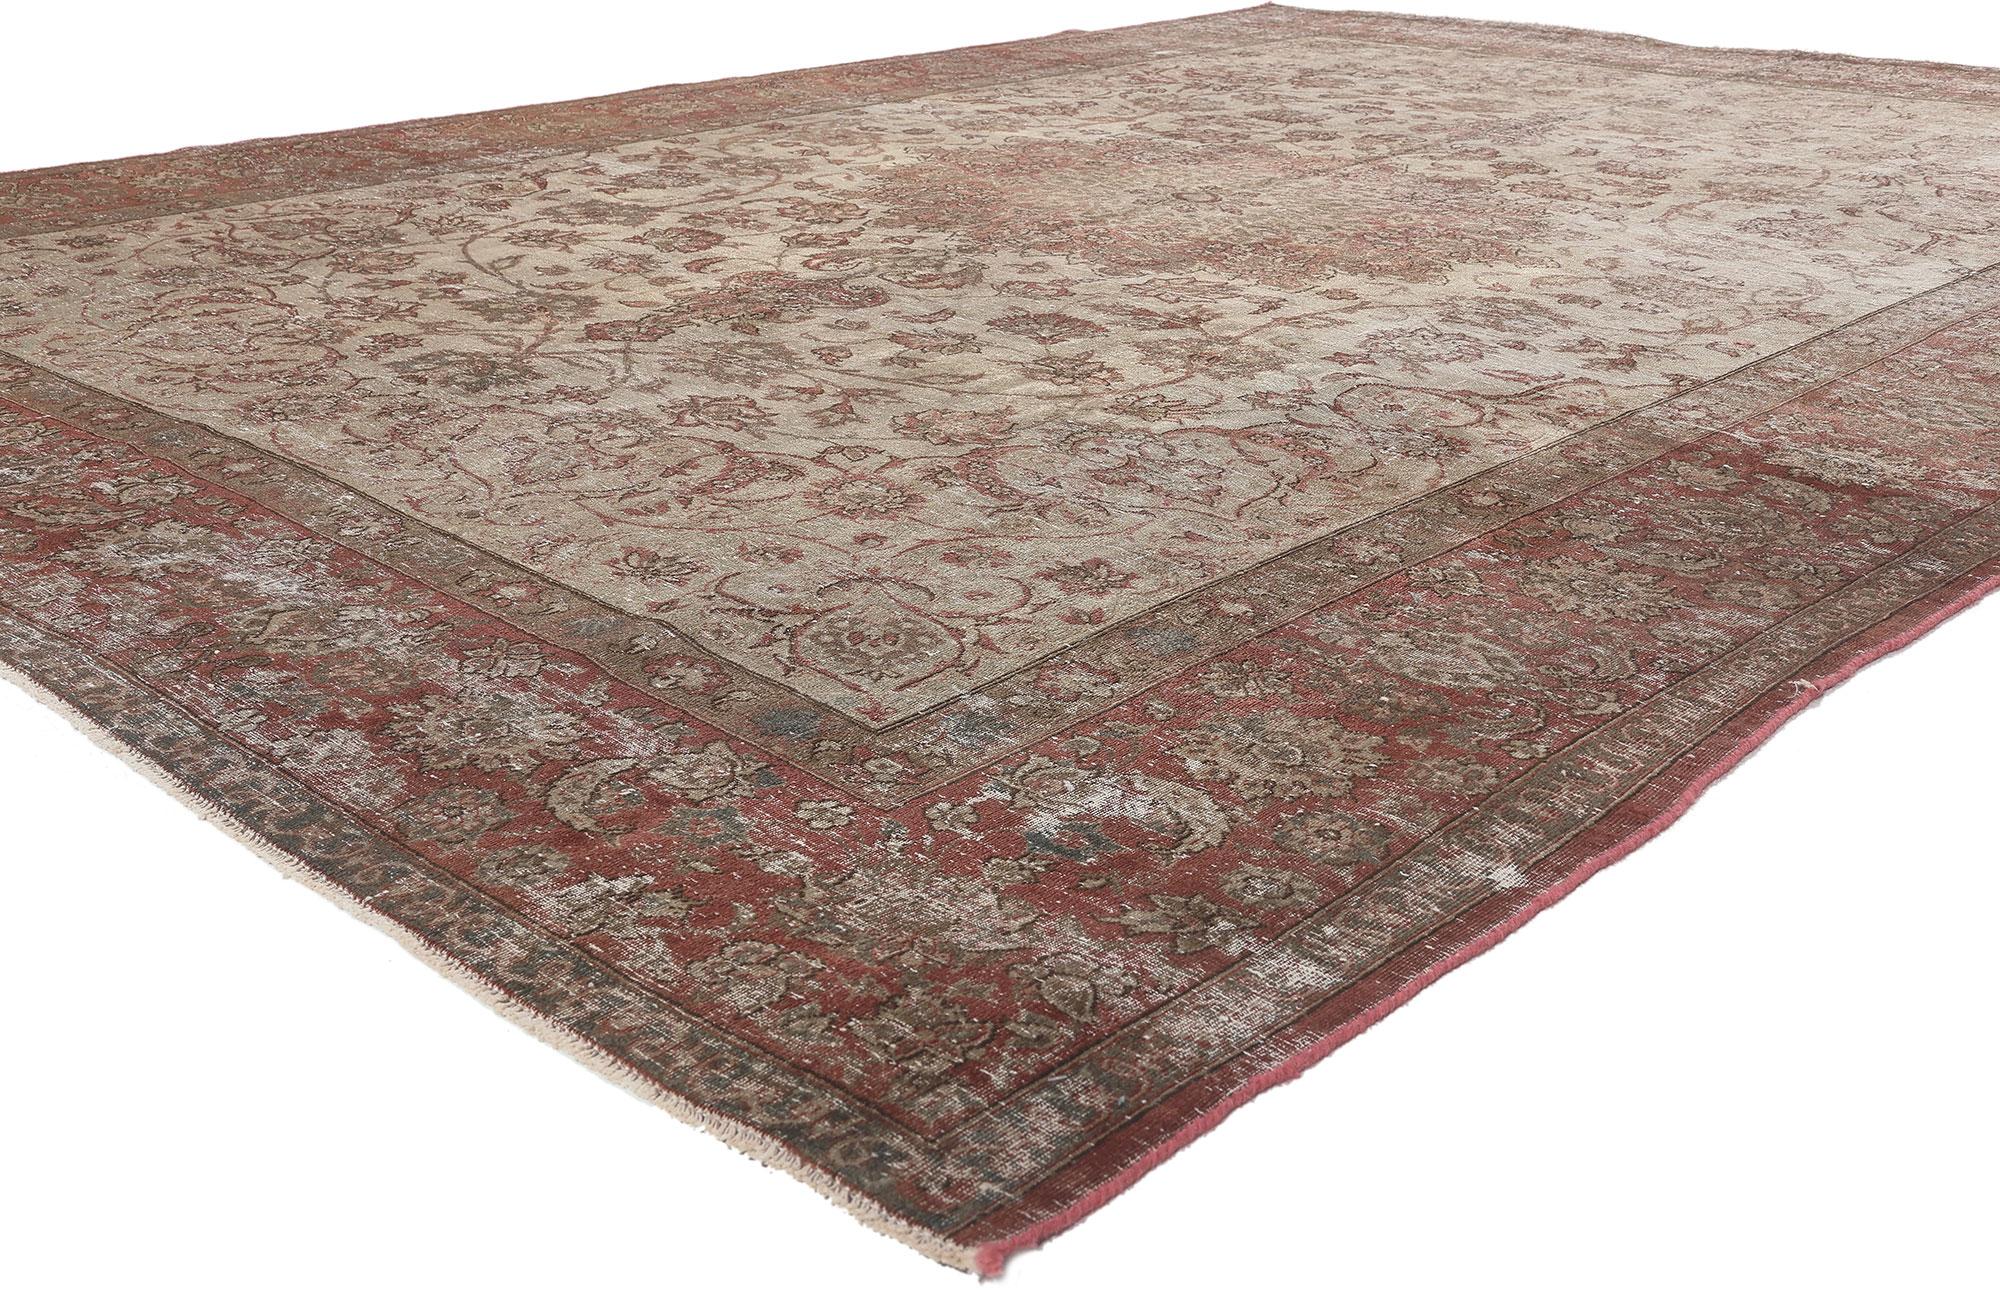 78585 Distressed Vintage Persian Tabriz Rug, 08'05 x 12'01.
Rustic elegance meets unpretentious and simple in this distressed vintage Persian Tabriz rug. The faded floral pattern and earthy colorway woven into this piece work together creating an